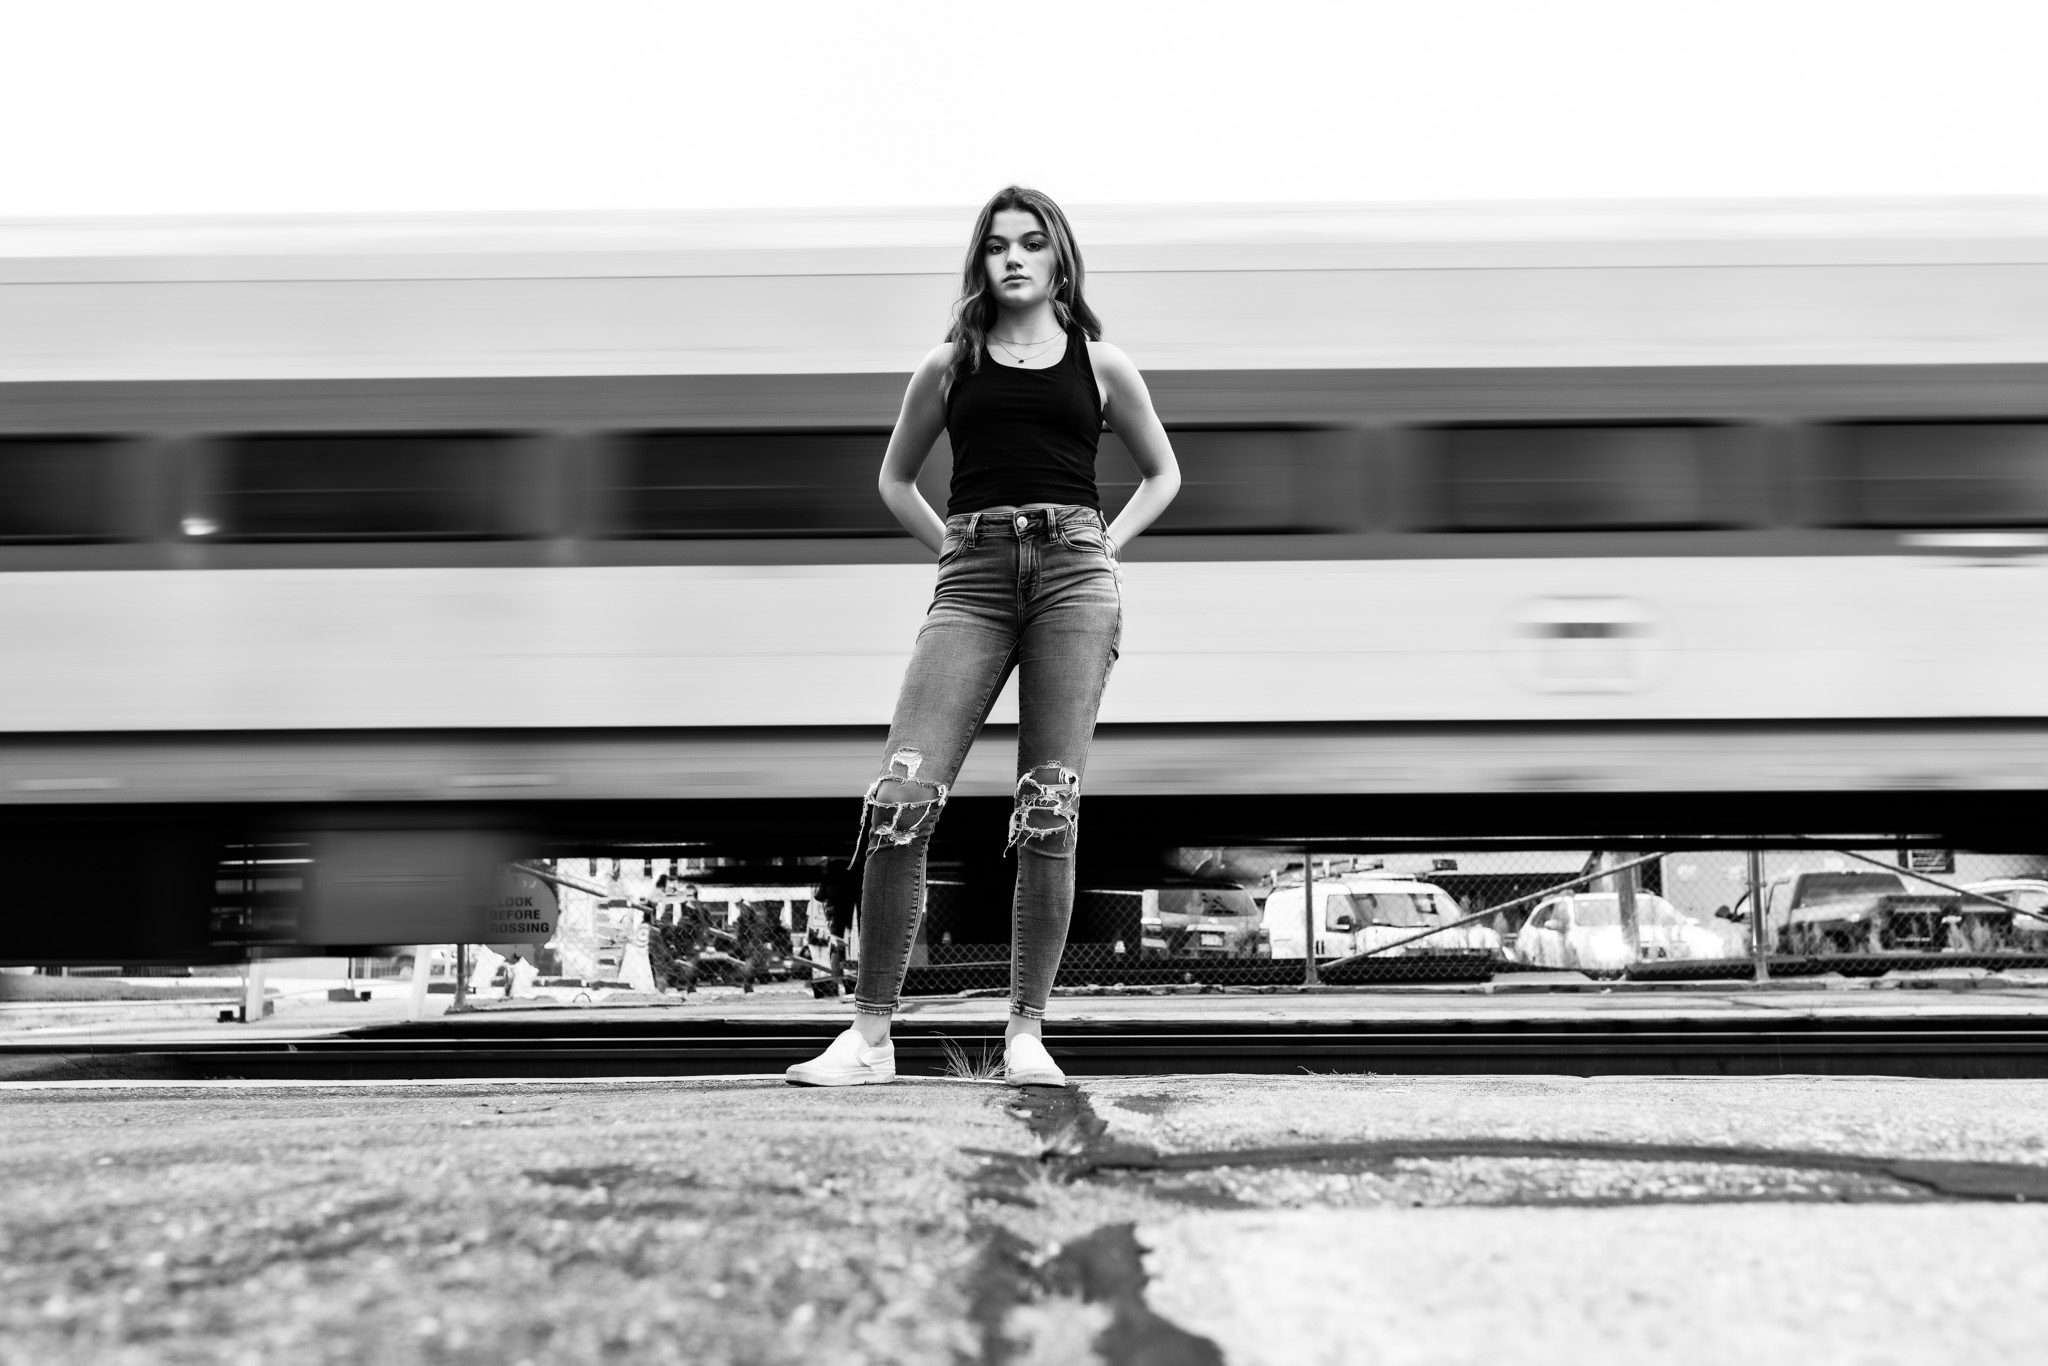 Urban Black and white senior portrait of a young woman standing in front of a moving commuter rail train and train track in Massachusetts